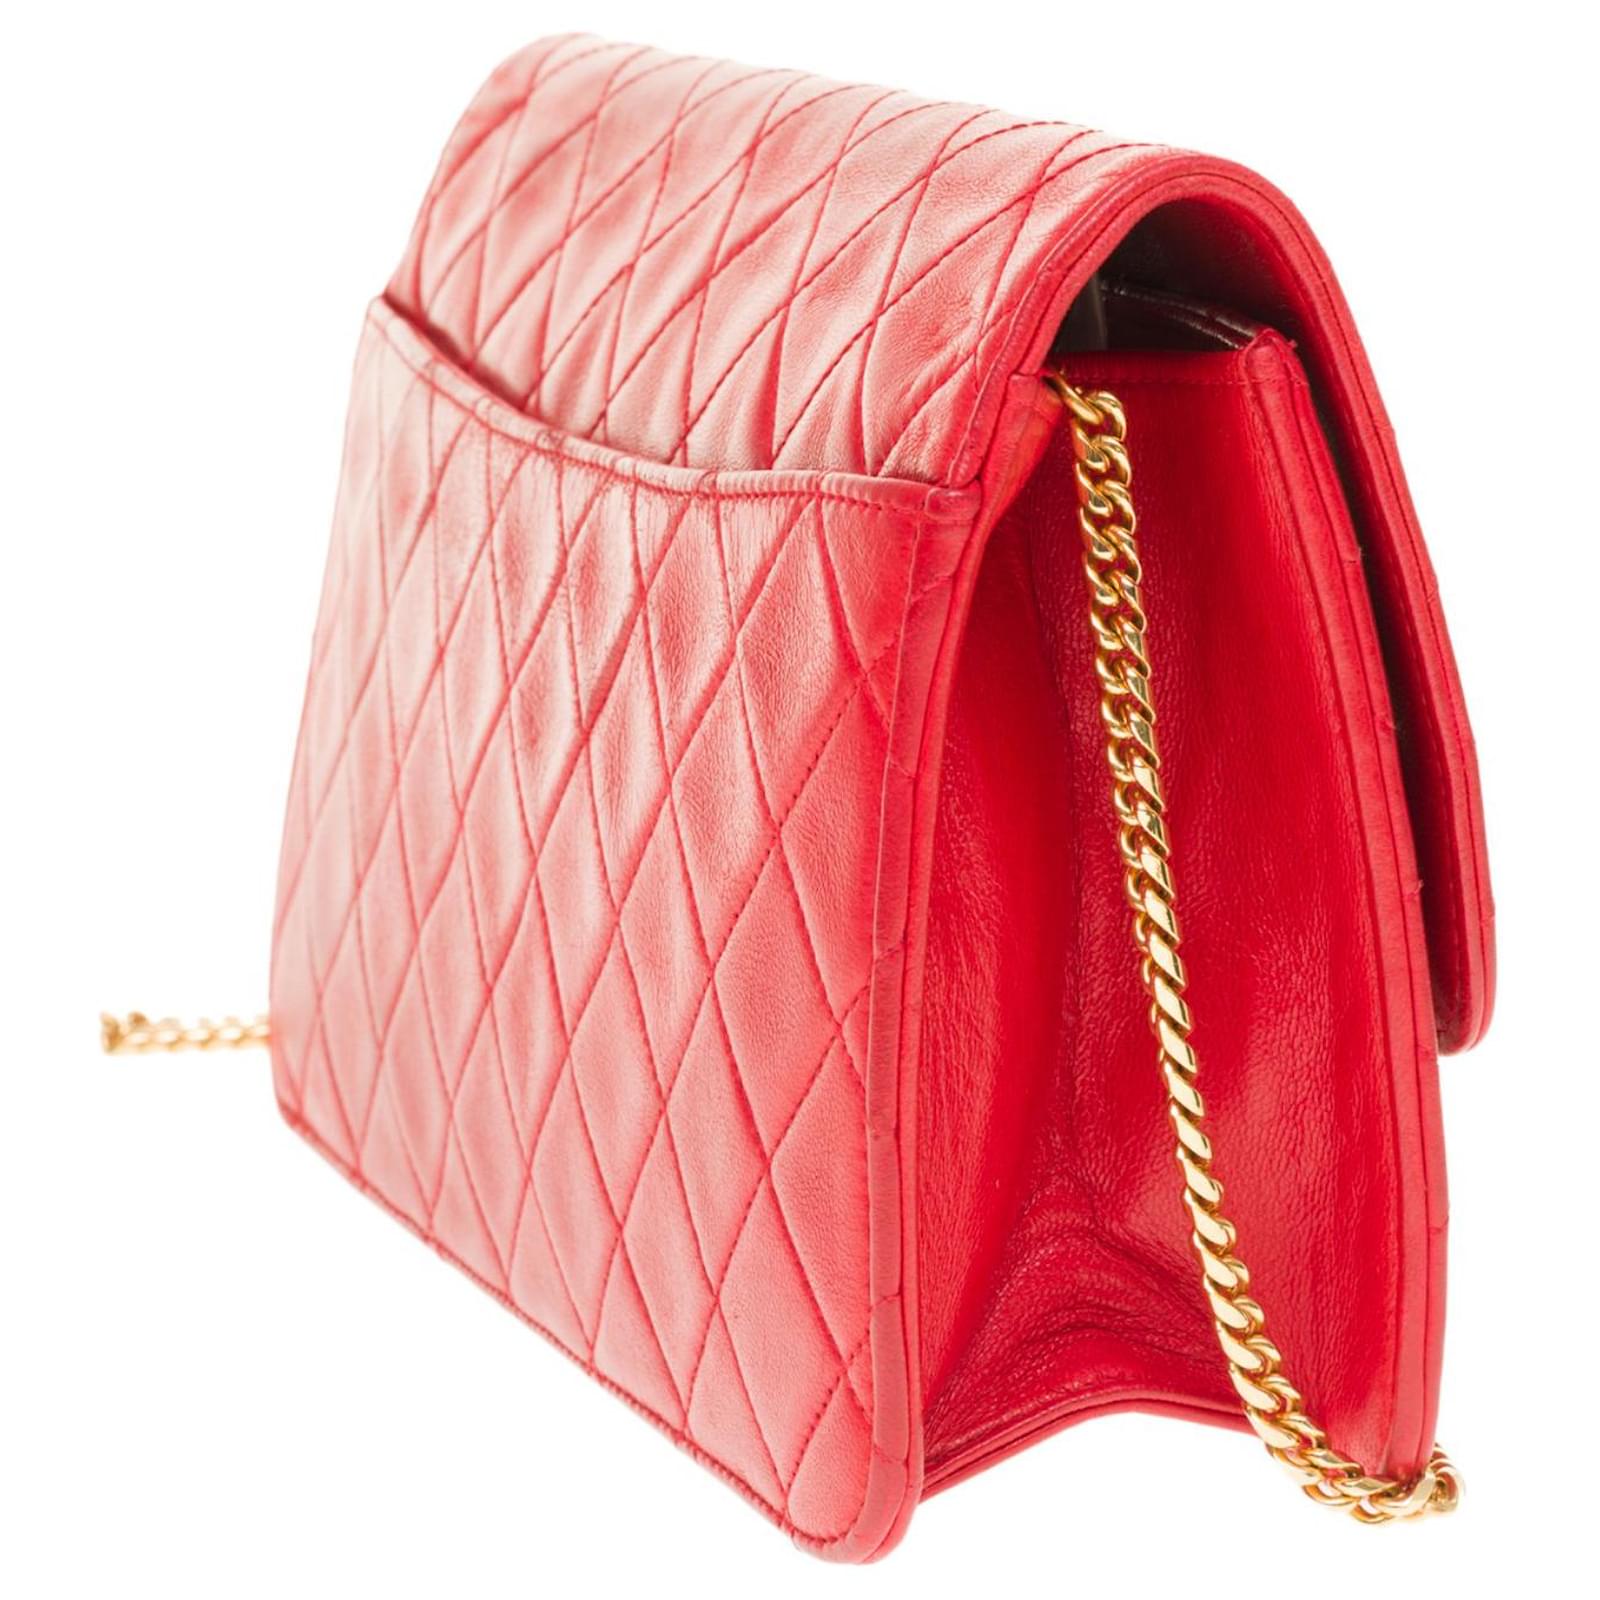 Chanel Valentine Bag - 5 For Sale on 1stDibs  chanel valentine bag 2023, chanel  valentines bag, chanel valentine collection